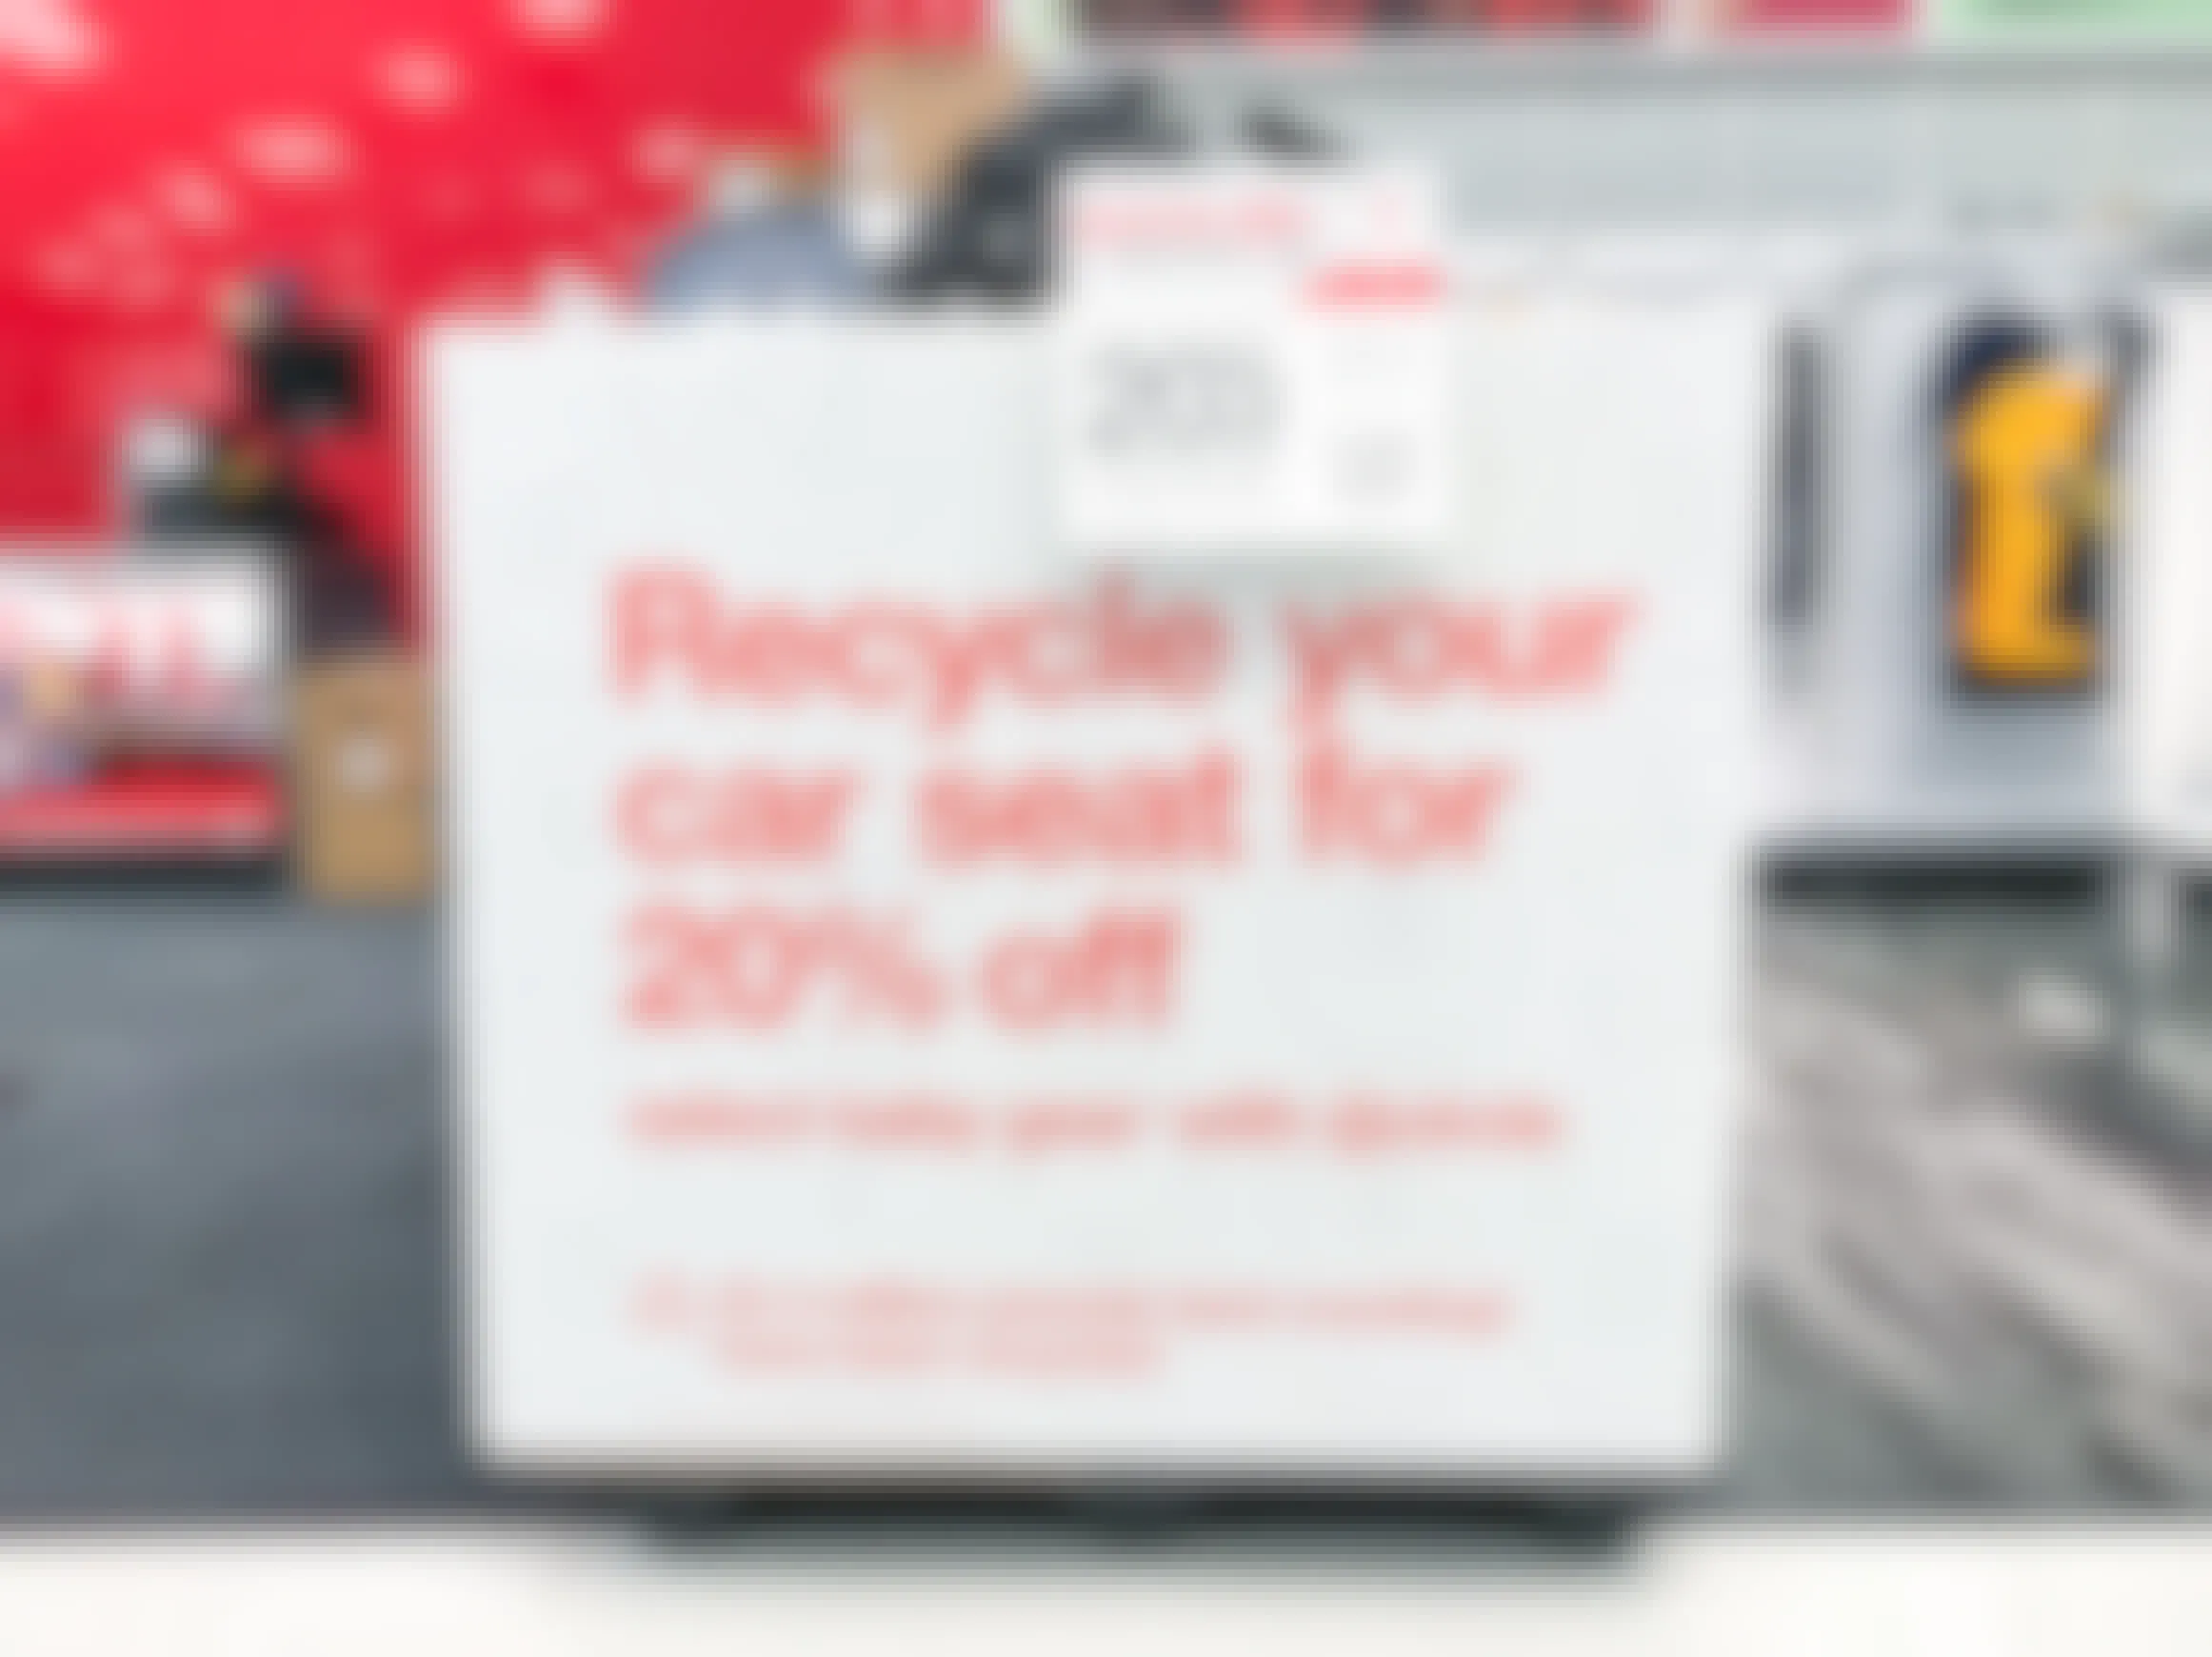 A sign inside Target advertising 20% off select baby gear when you recycle a car seat.